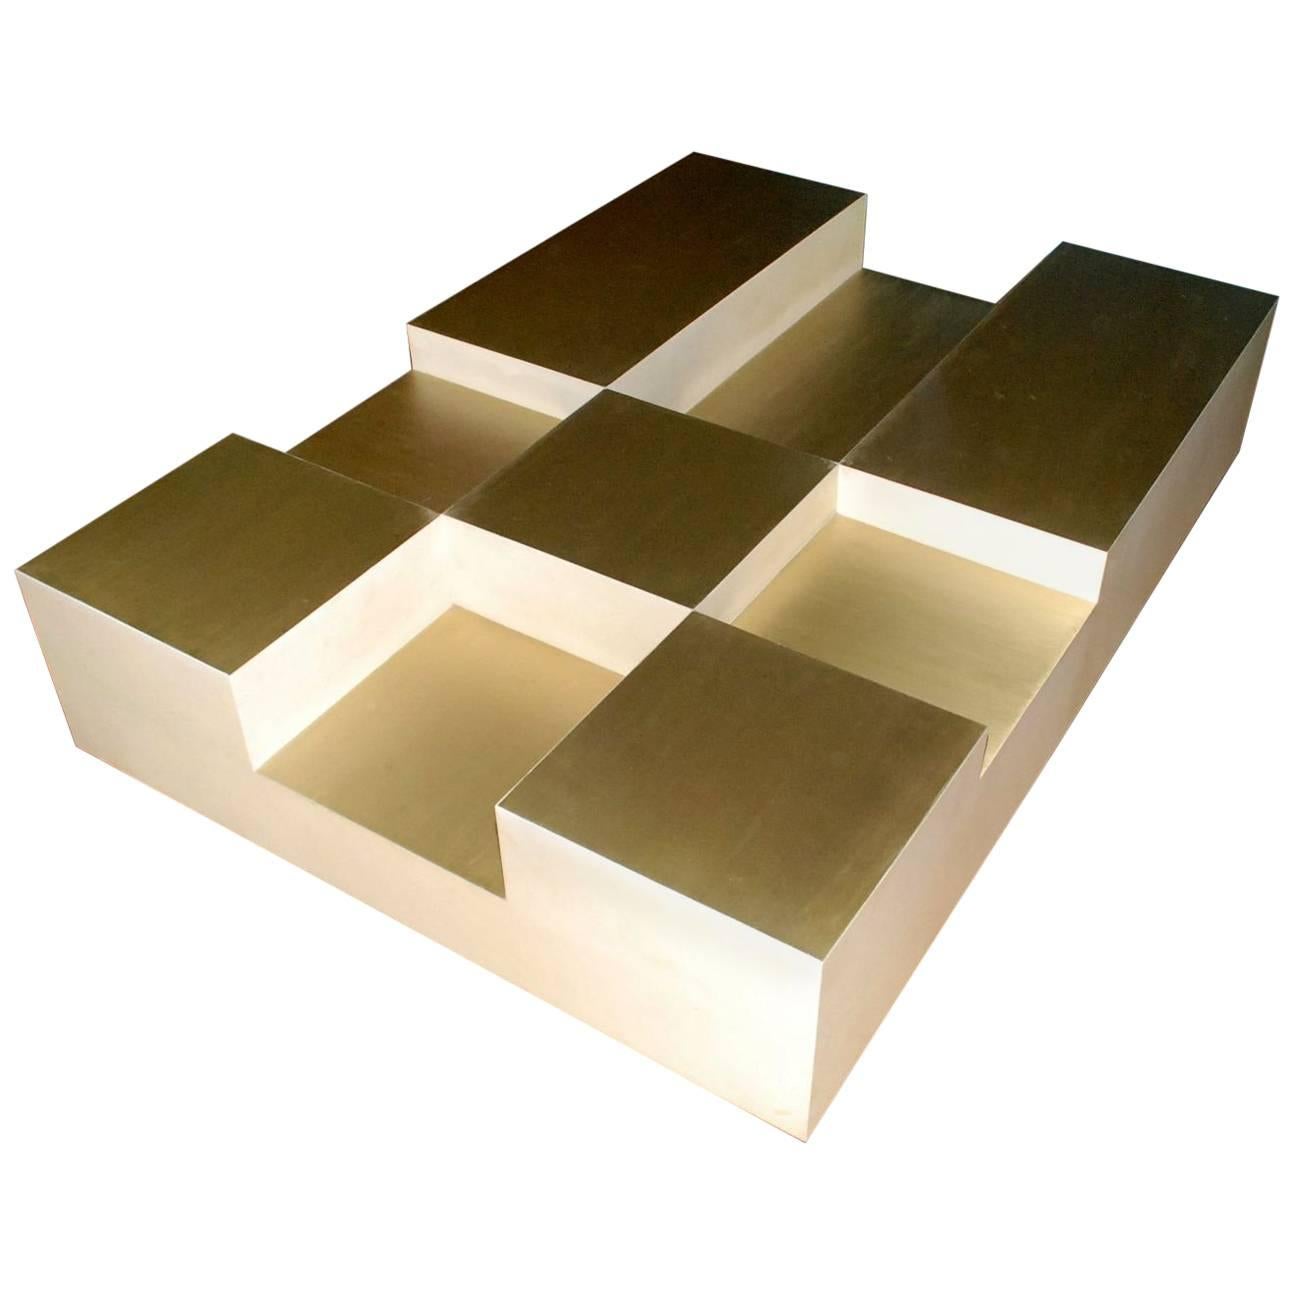 Goatskin and Brass "Cube" Design Coffee Table